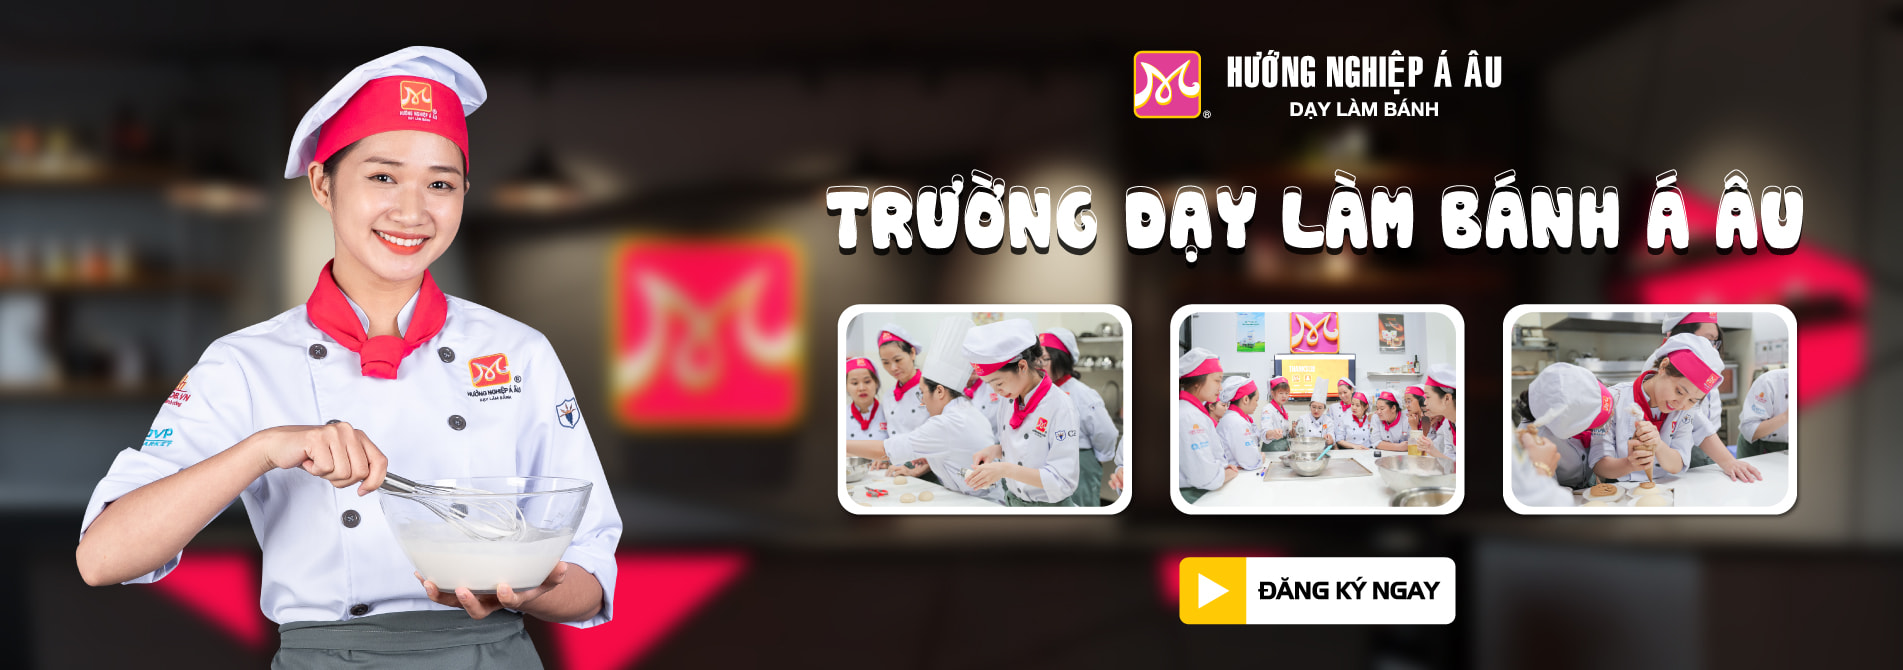 banner truong day lam banh a au